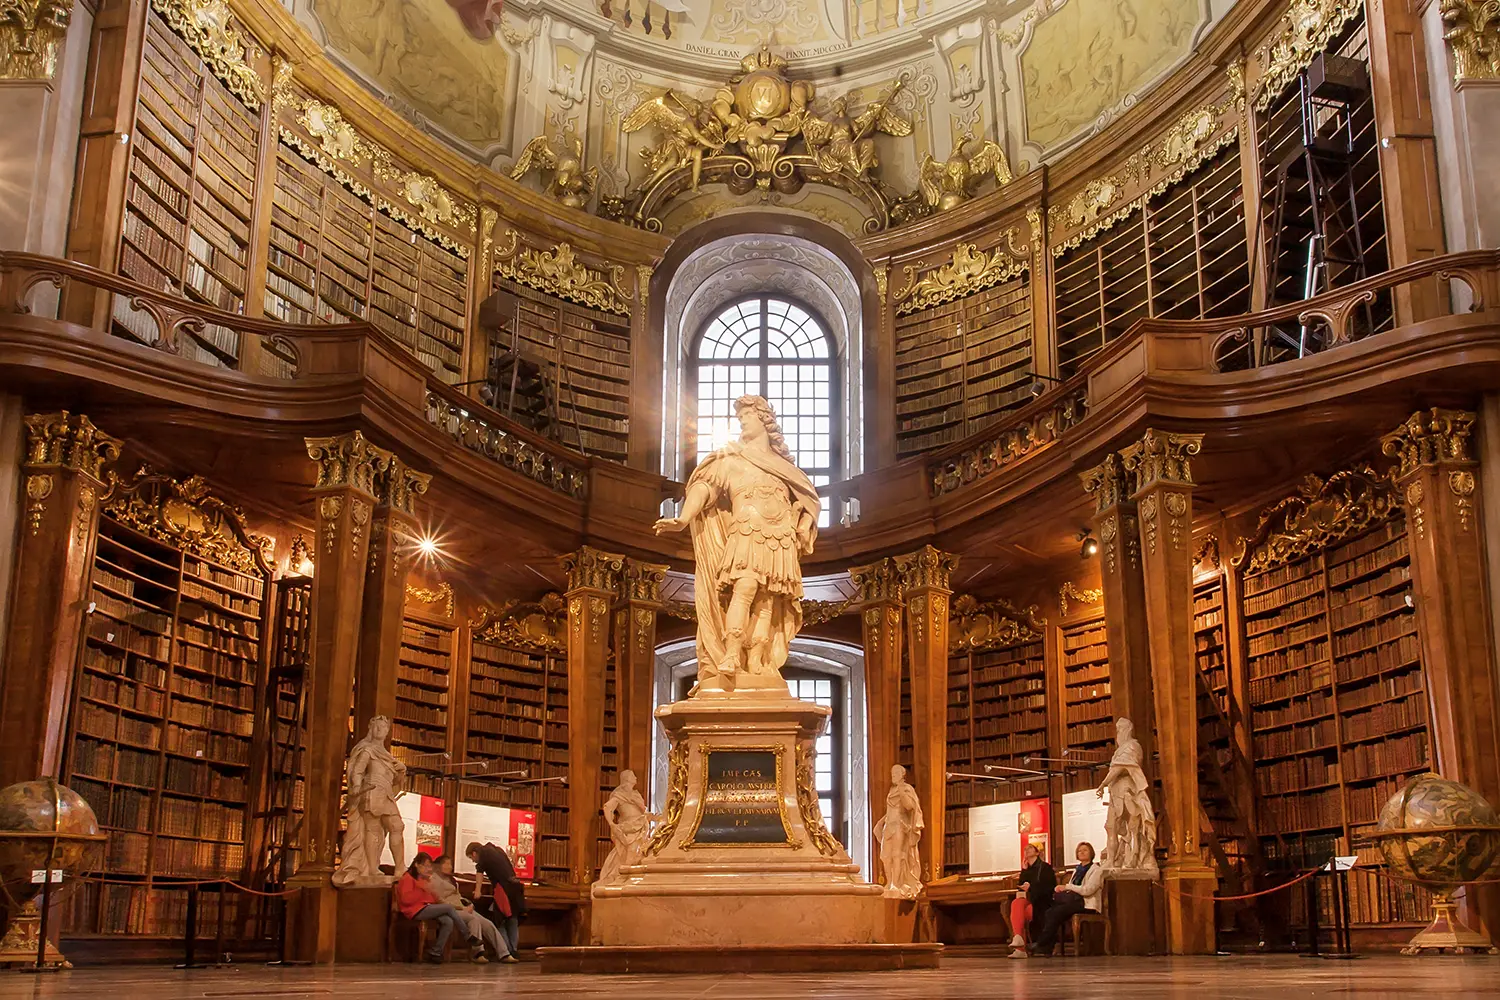 Antique sculpture in interior of old books of the Austrian National Library in Vienna, Austria